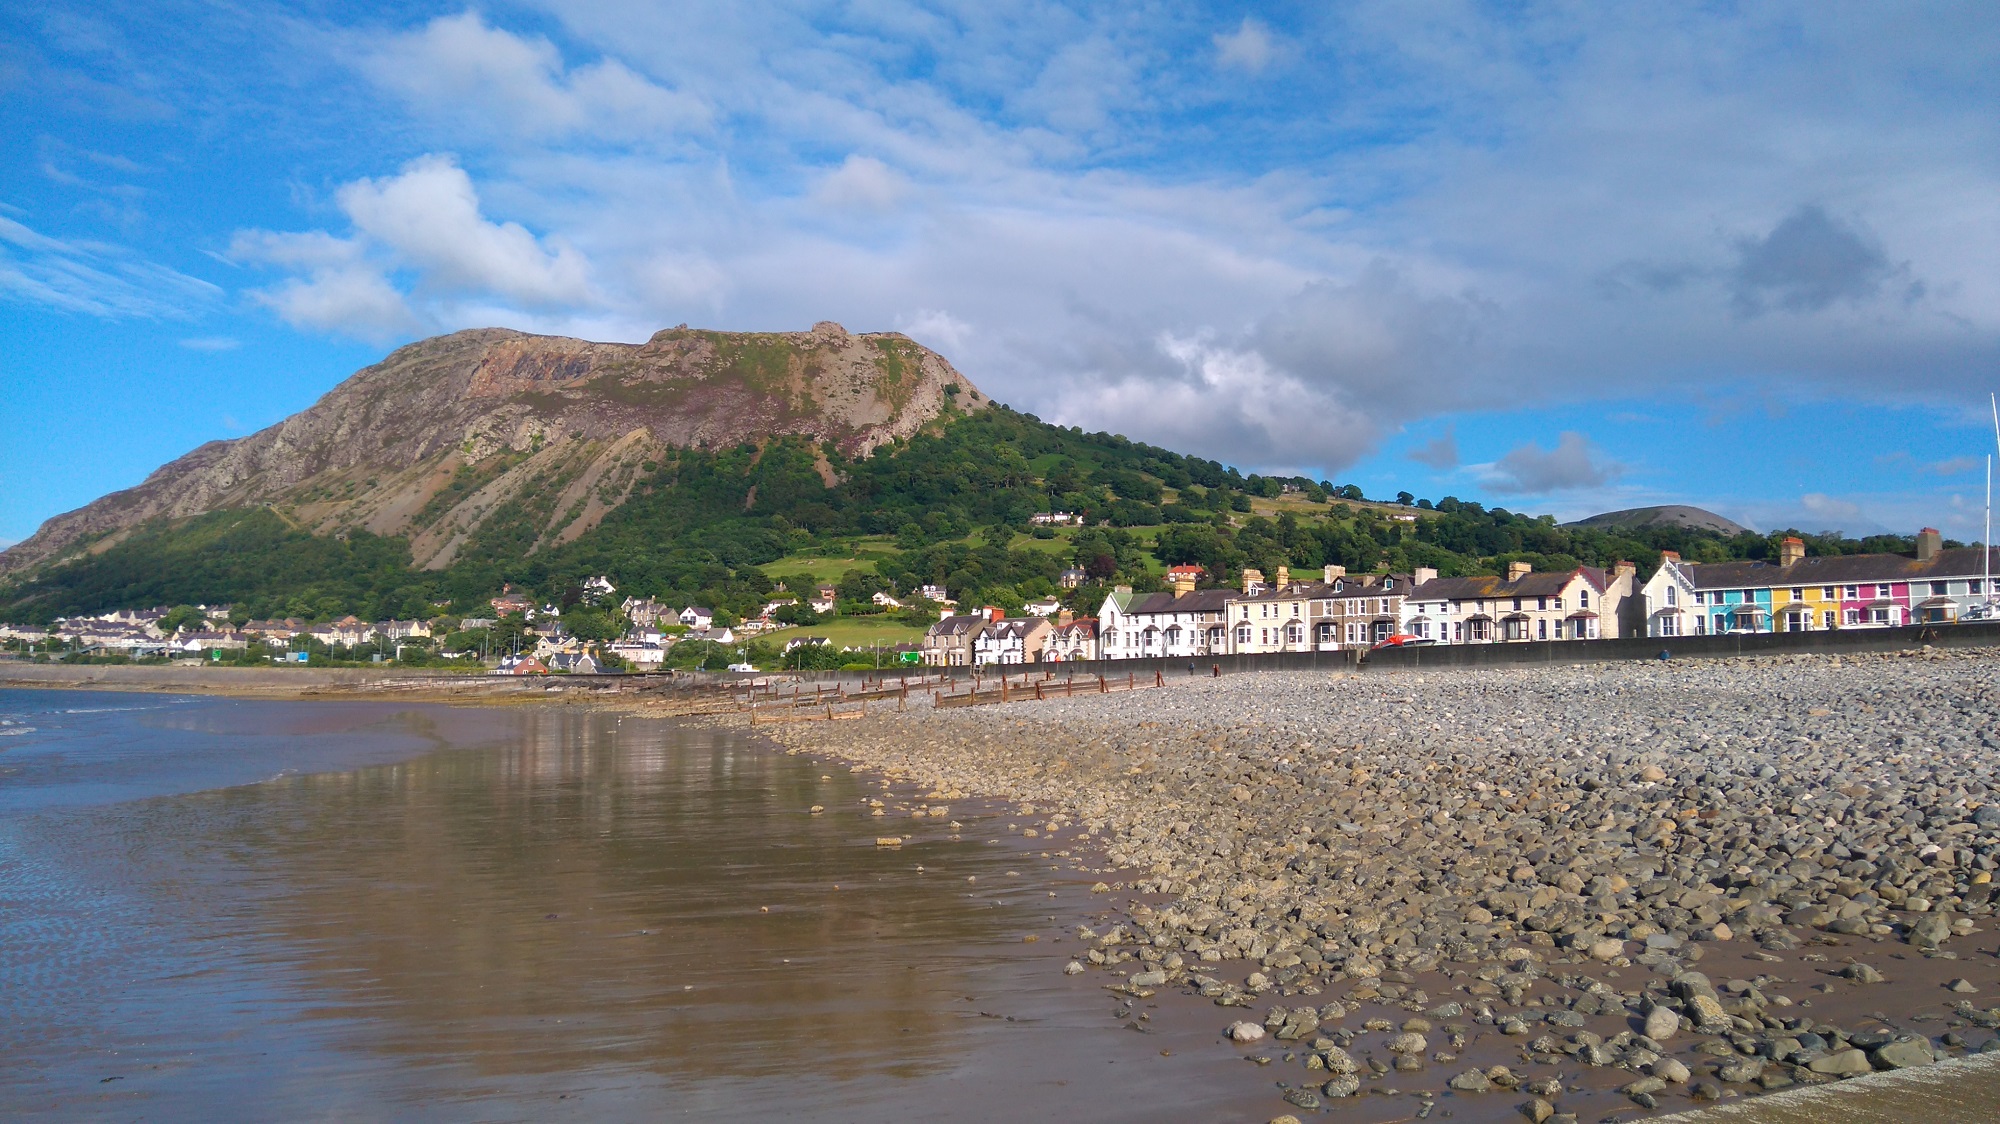 A seaside mountain dominates the beach under a mainly blue sky on a summer day. A row of houses are visible in the middle ground. Llanfairfechan, Wales.